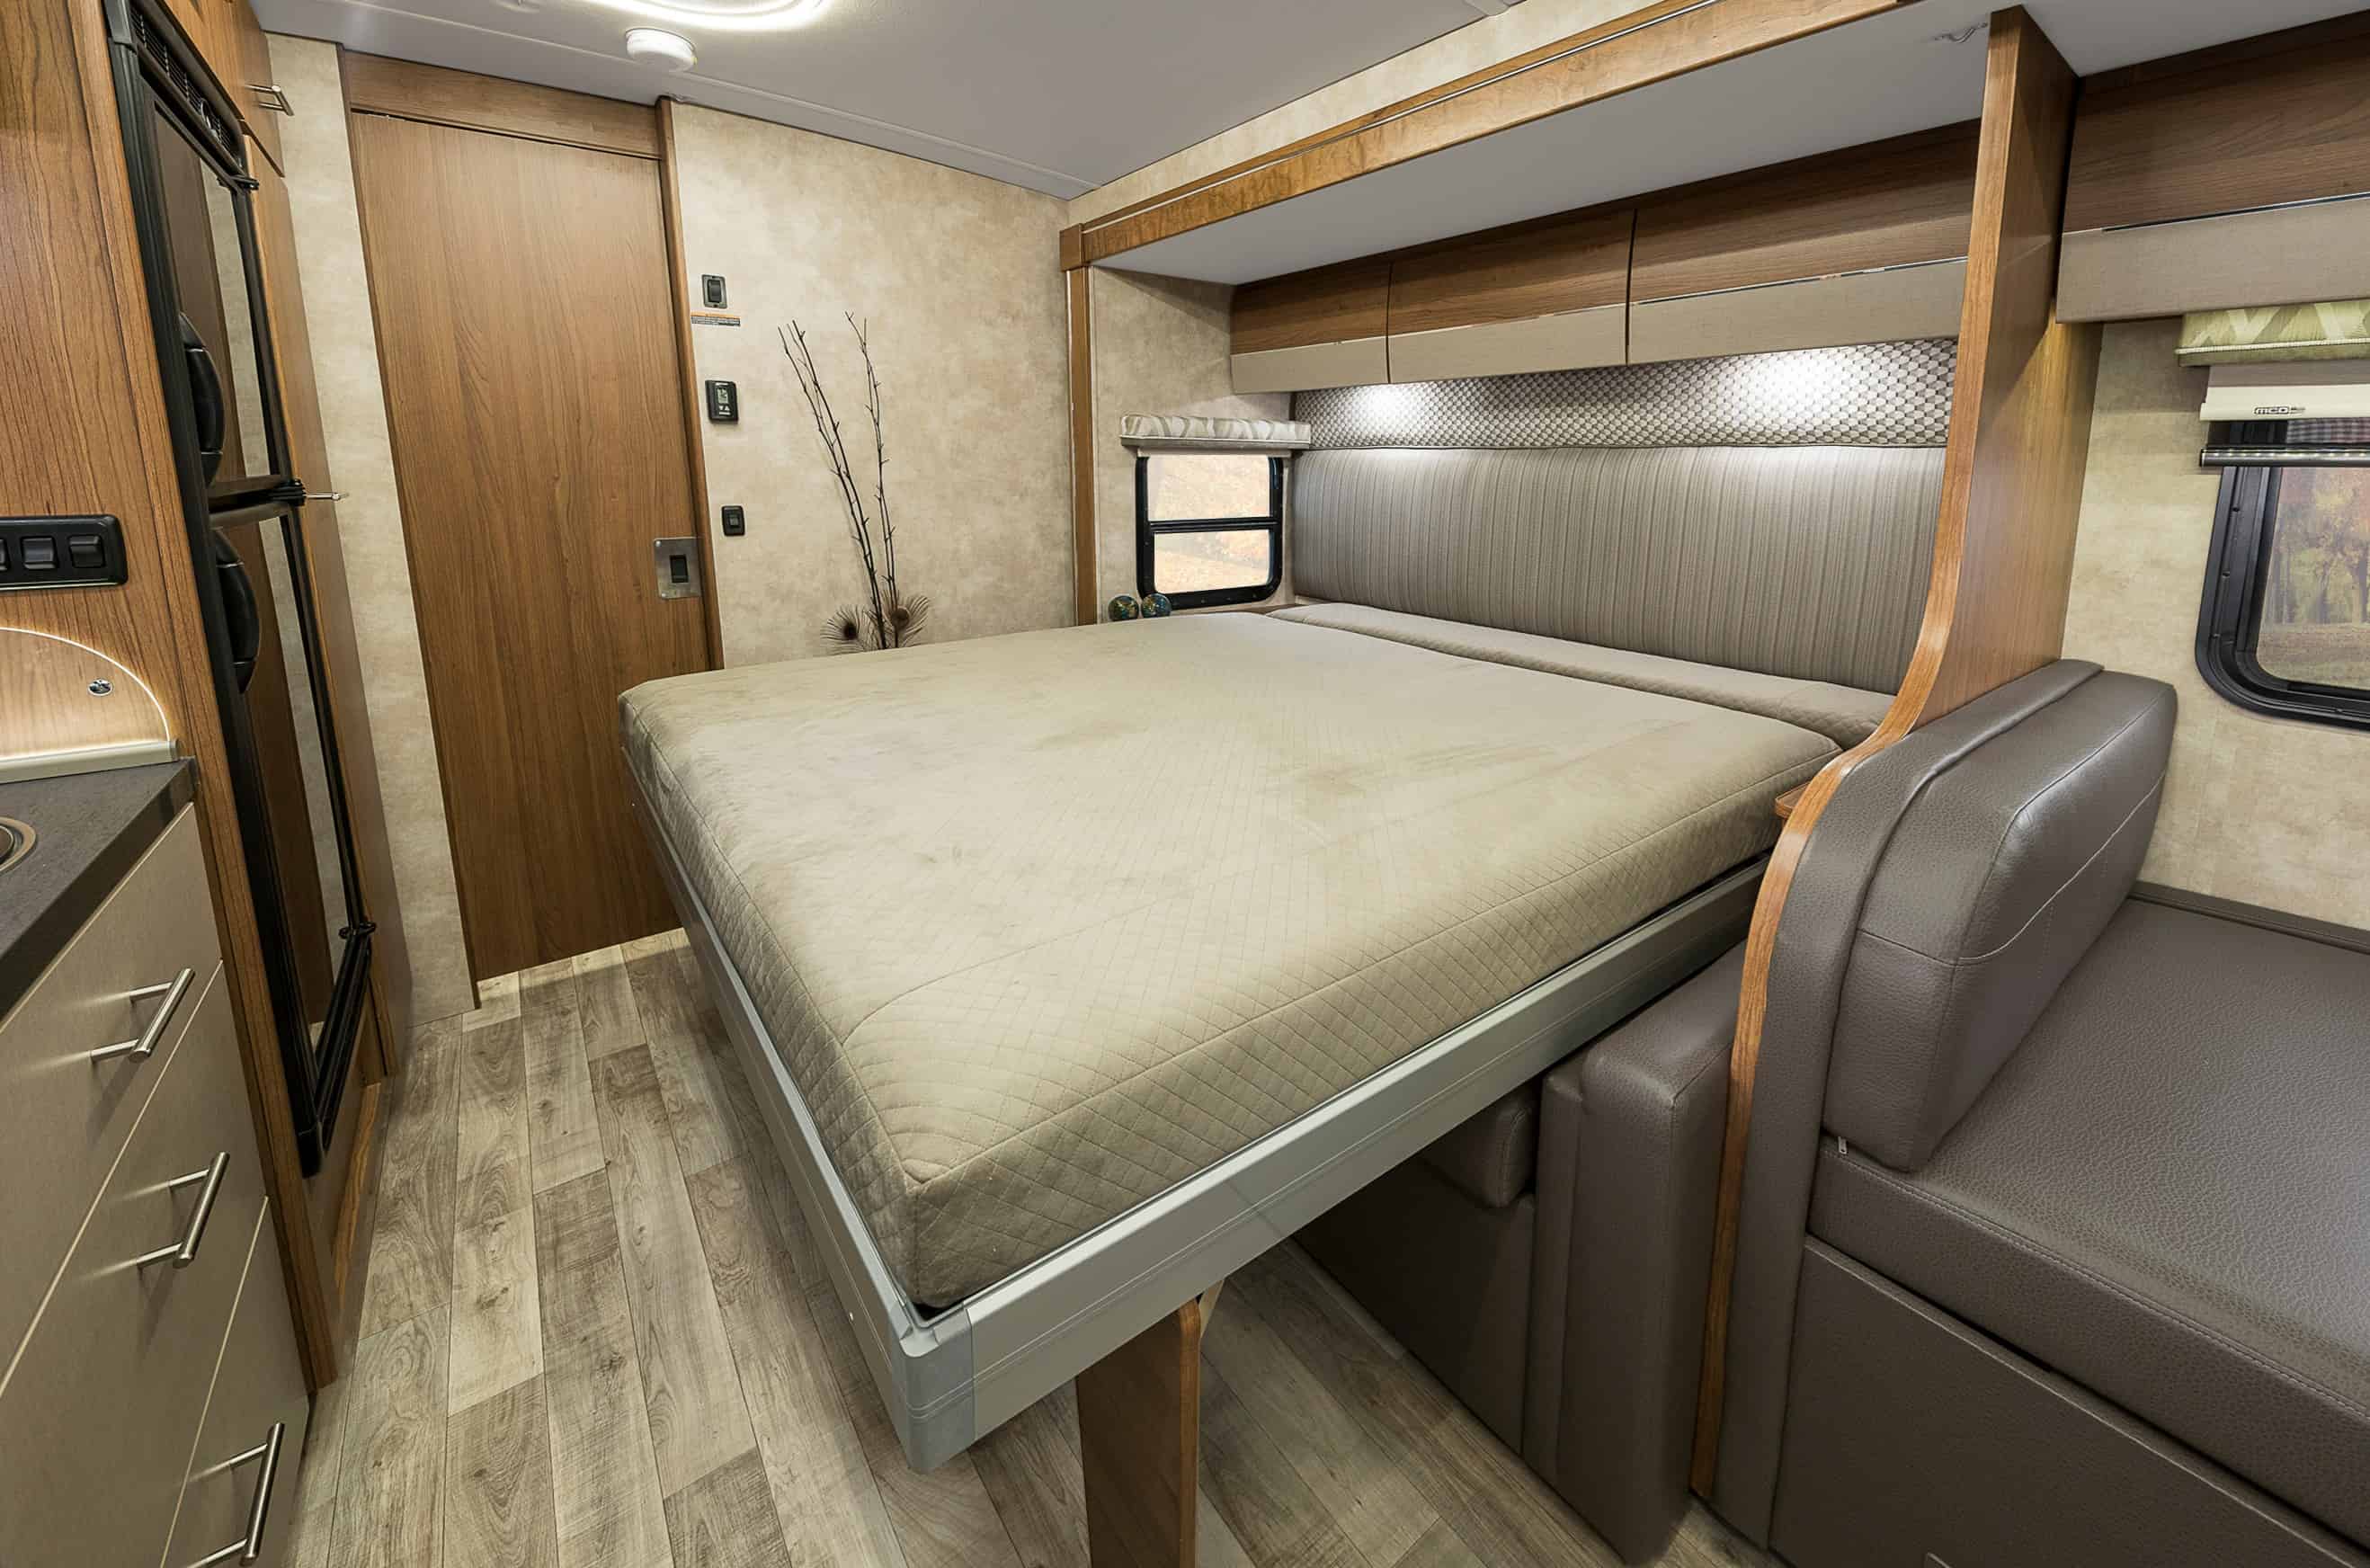 Travel Trailers With Murphy Beds, Double Over Double Bunk Bed Travel Trailers